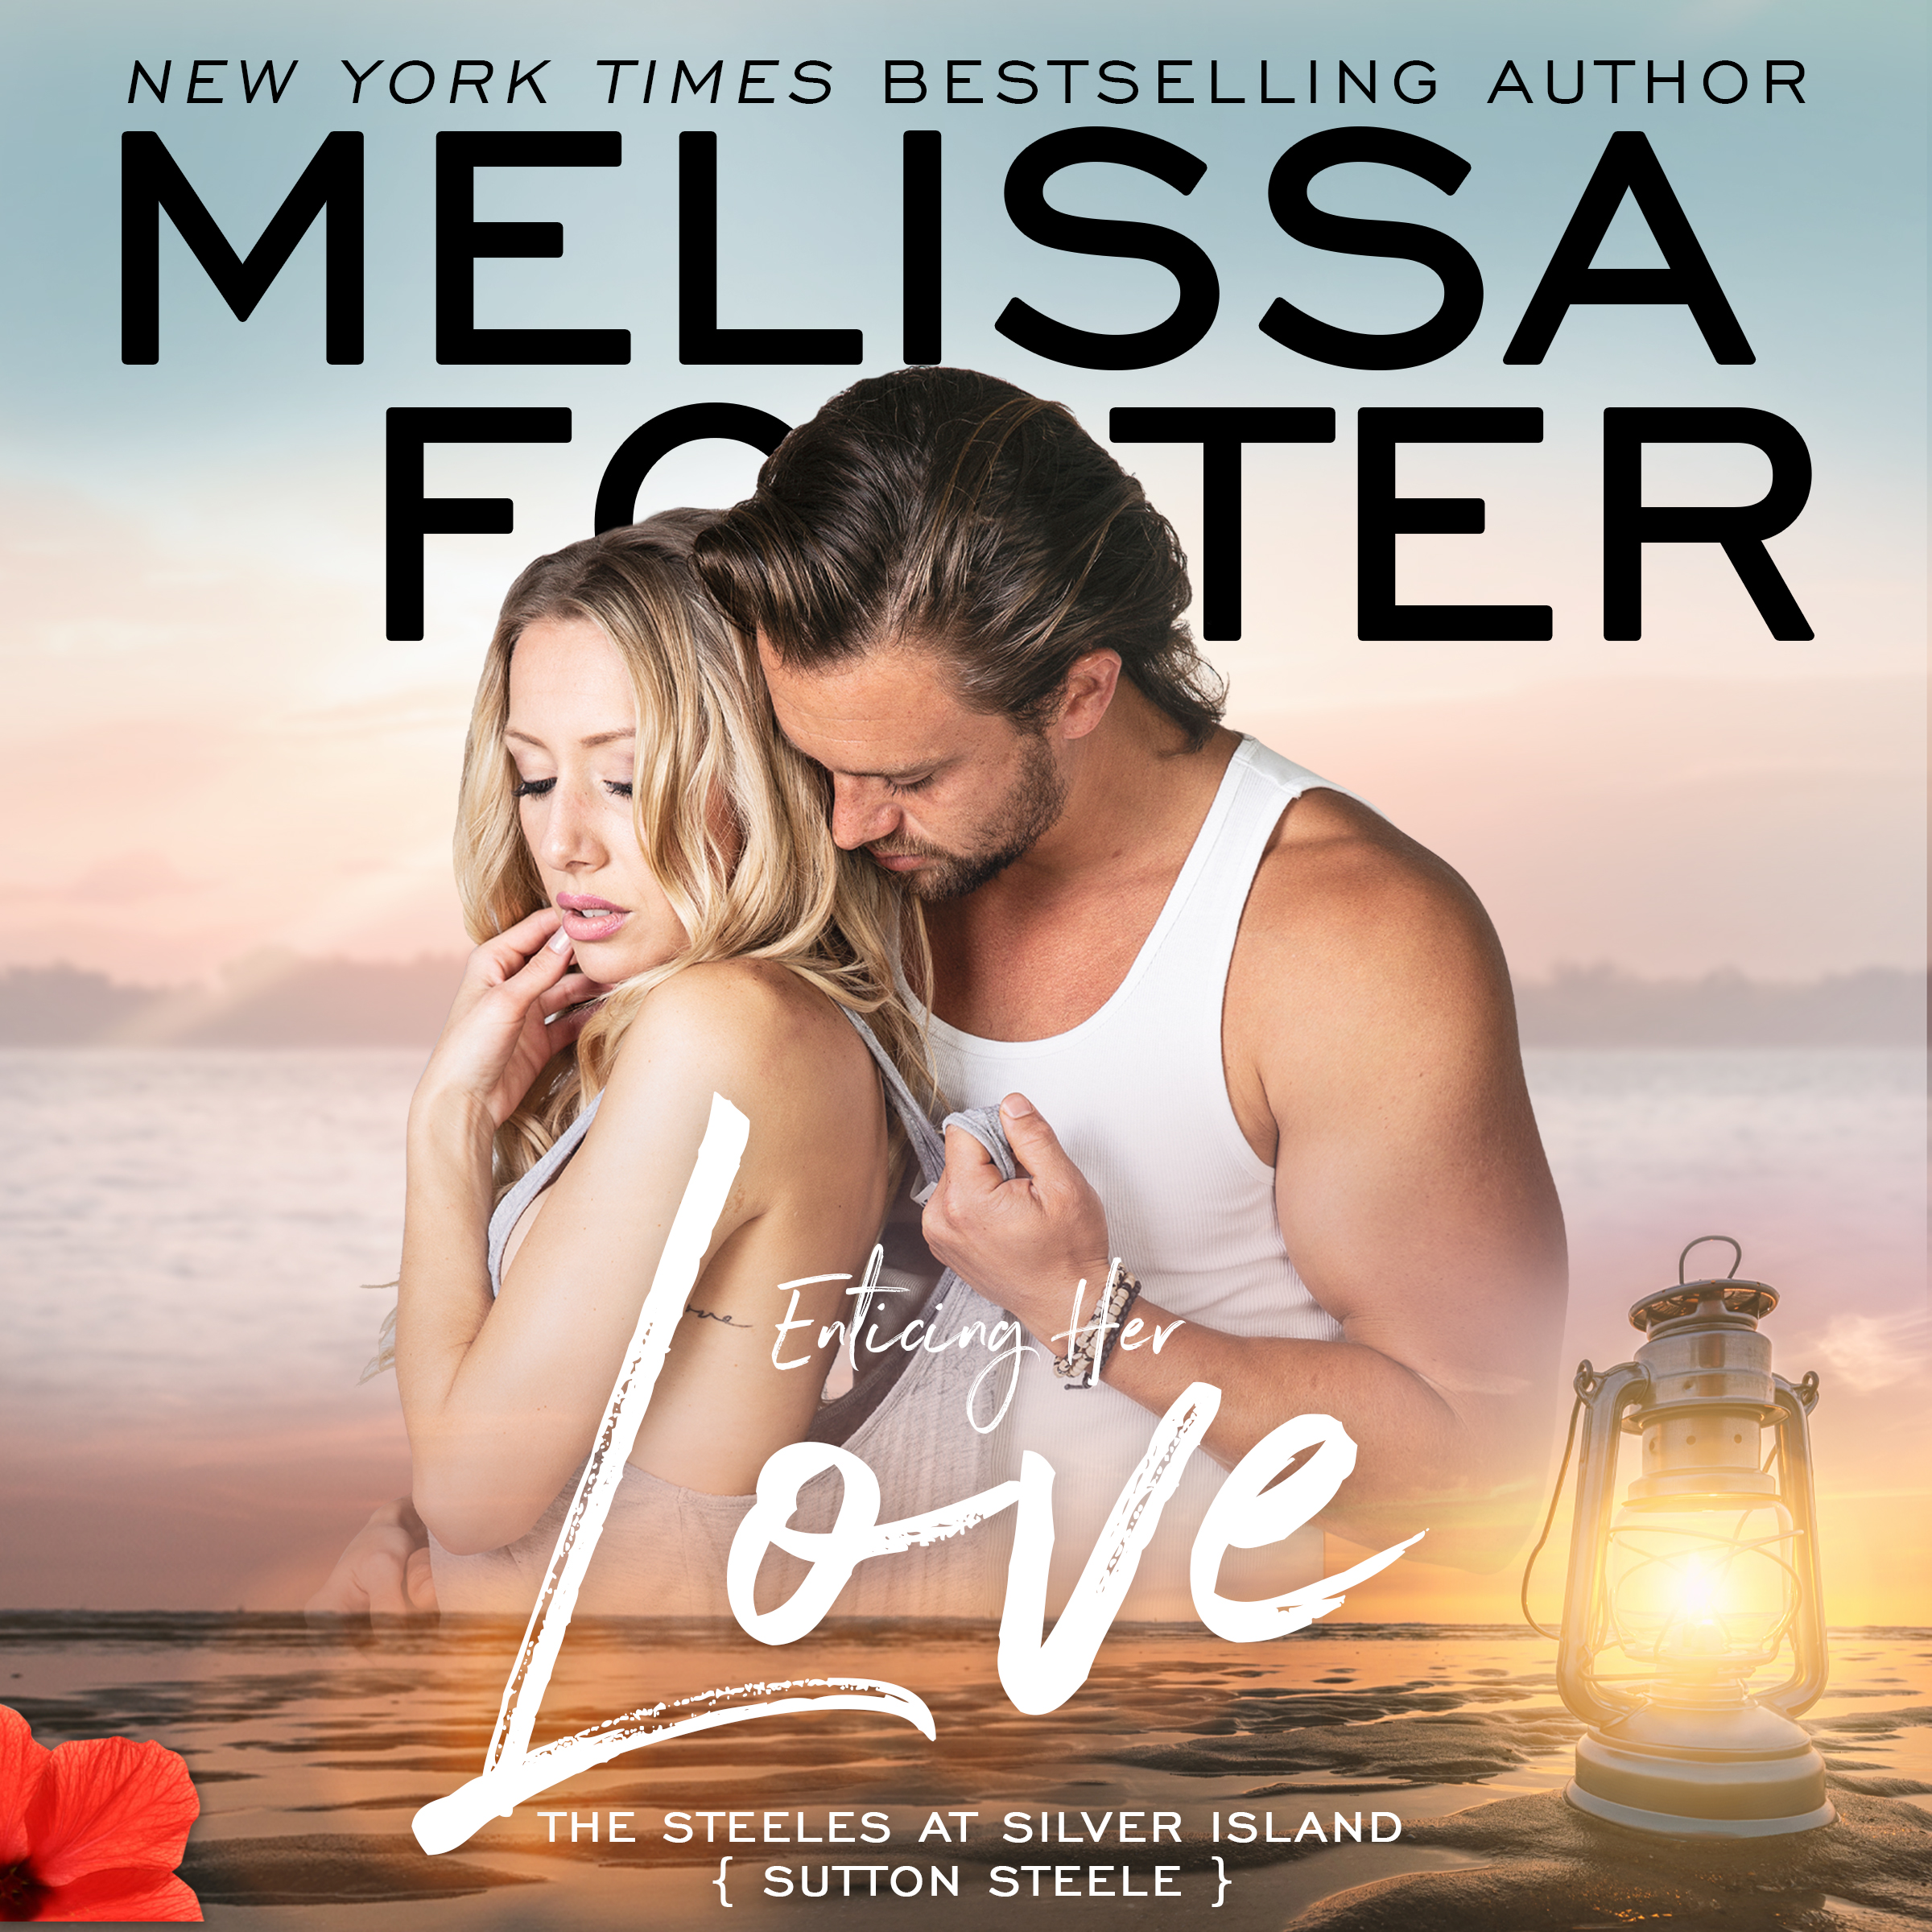 Enticing Her Love audiobook by Melissa Foster